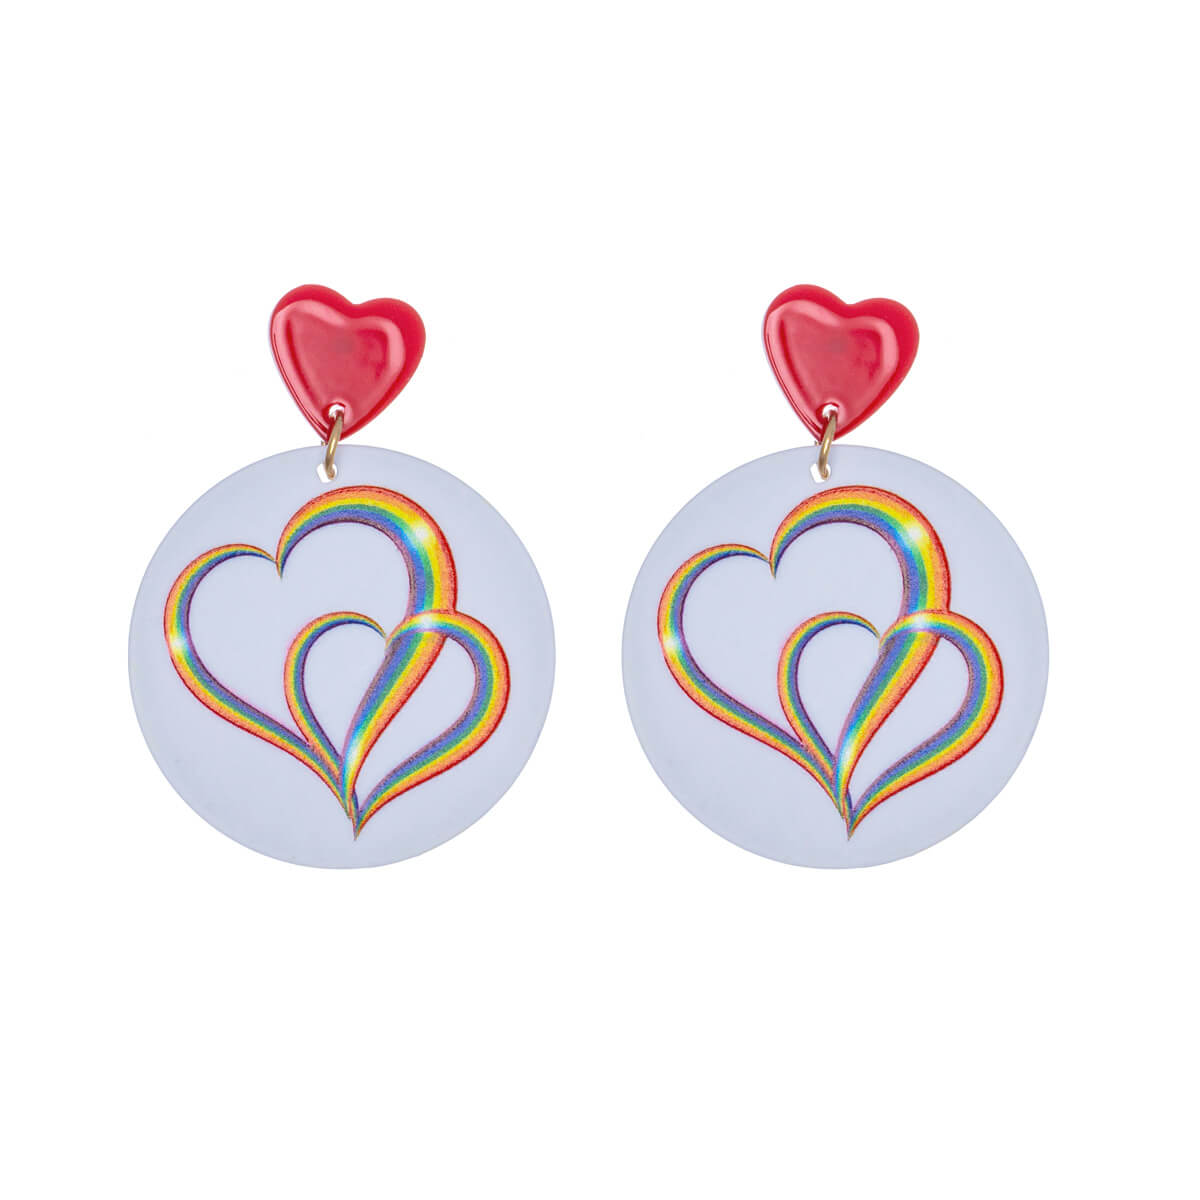 Round patterned earrings hearts